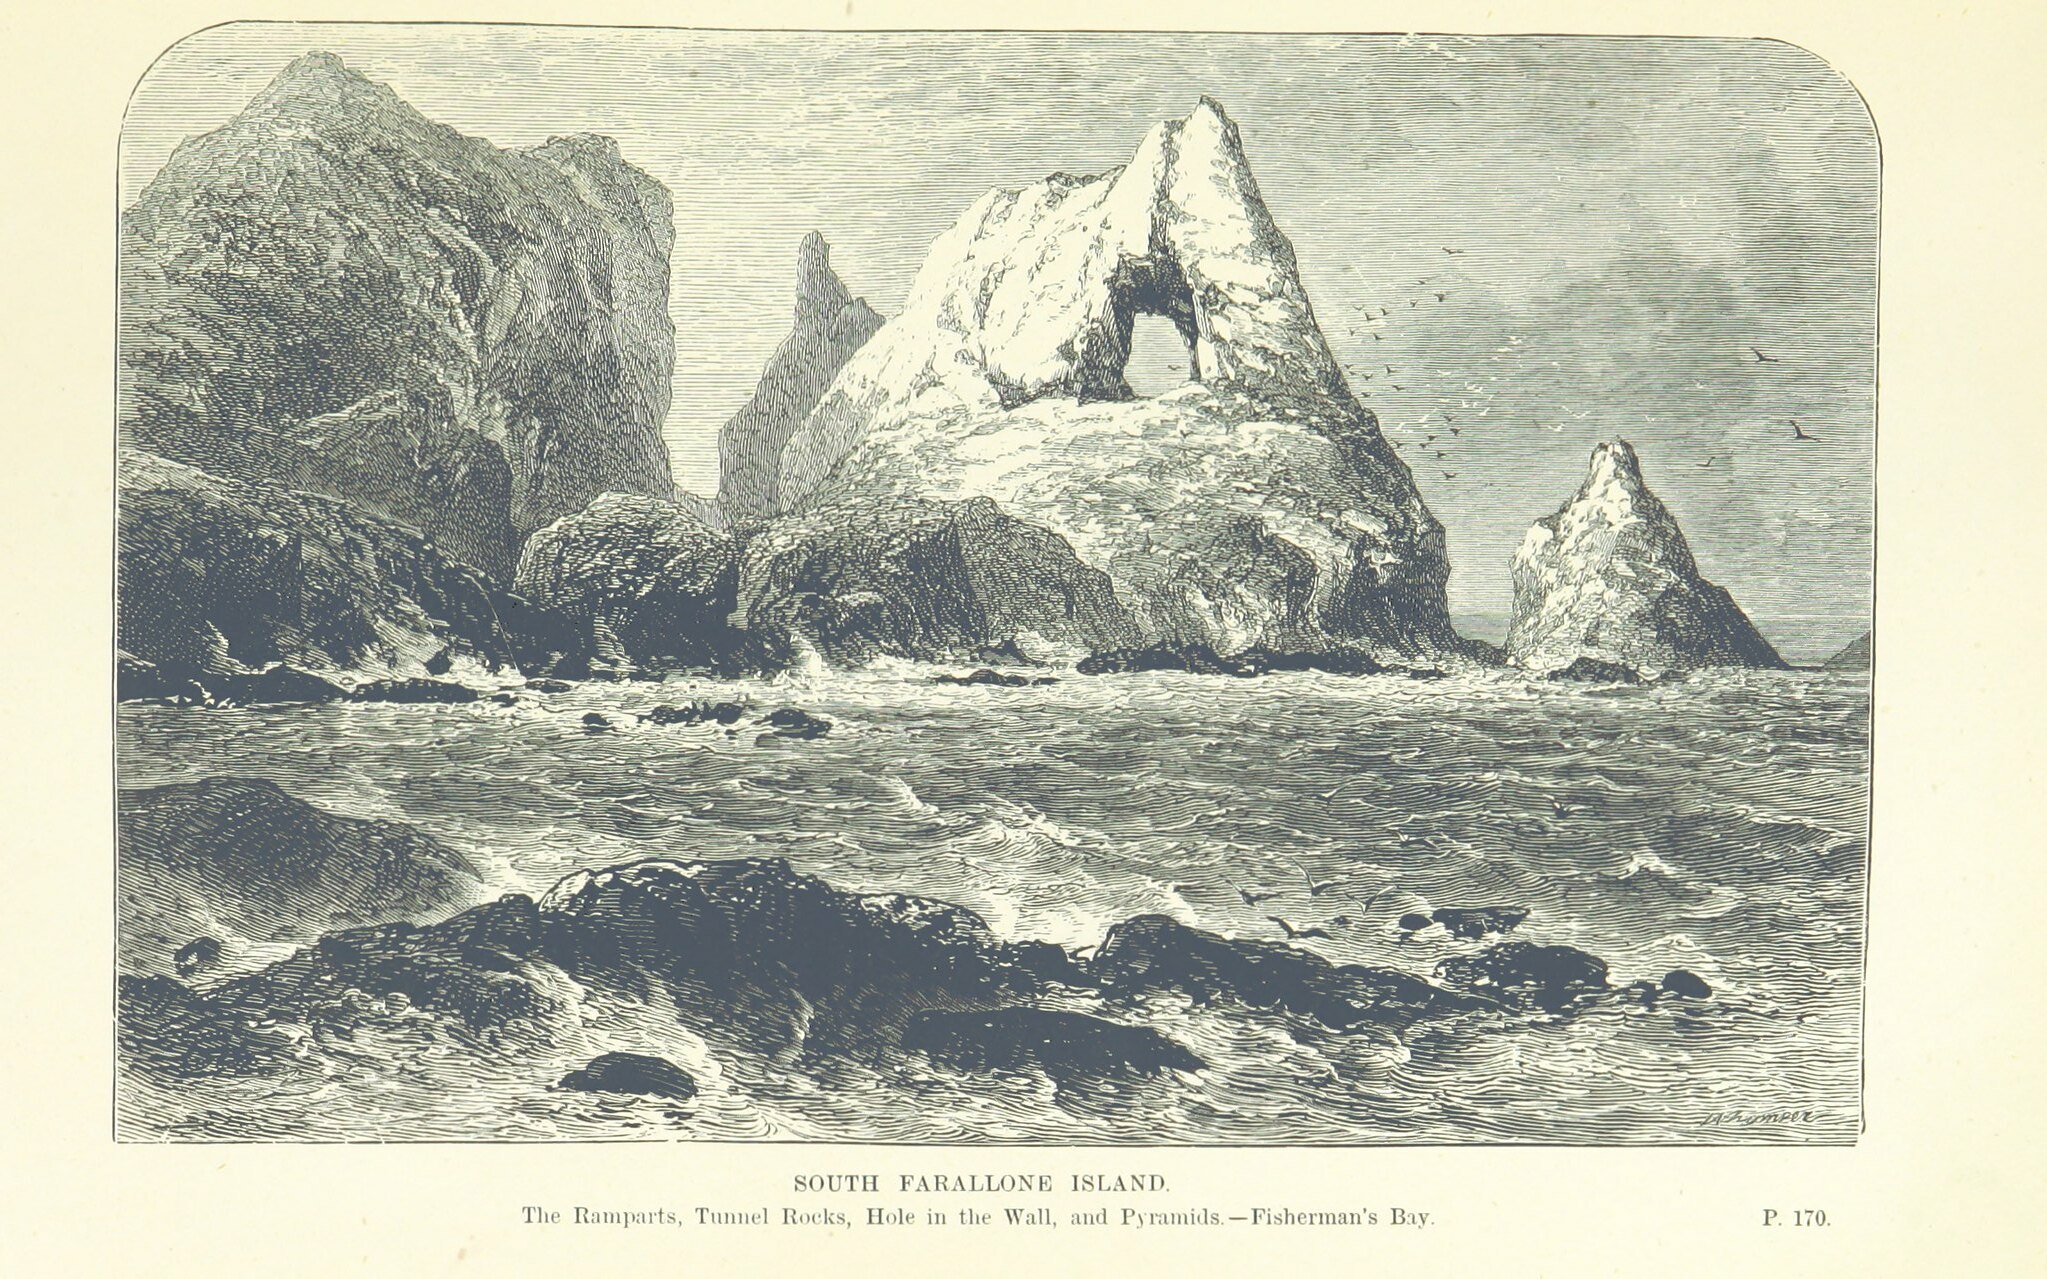 An illustration of the Farallons, with waves splashing up on the rocky shore in the foreground.